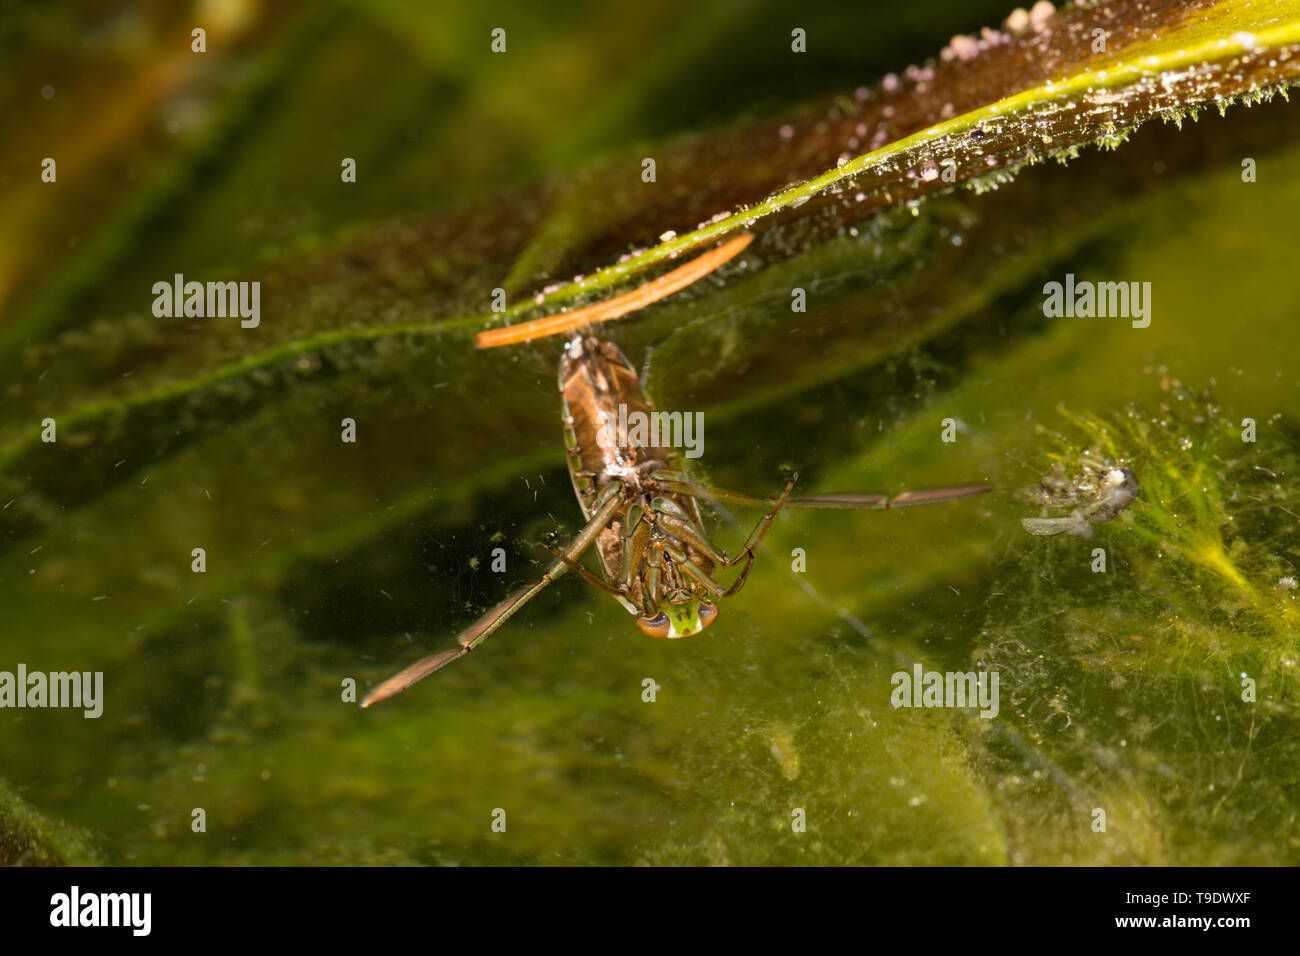 A water boatman, Notonecta glauca, photographed at night in May in the margins of a garden pond in Lancashire North West England UK GB Stock Photo